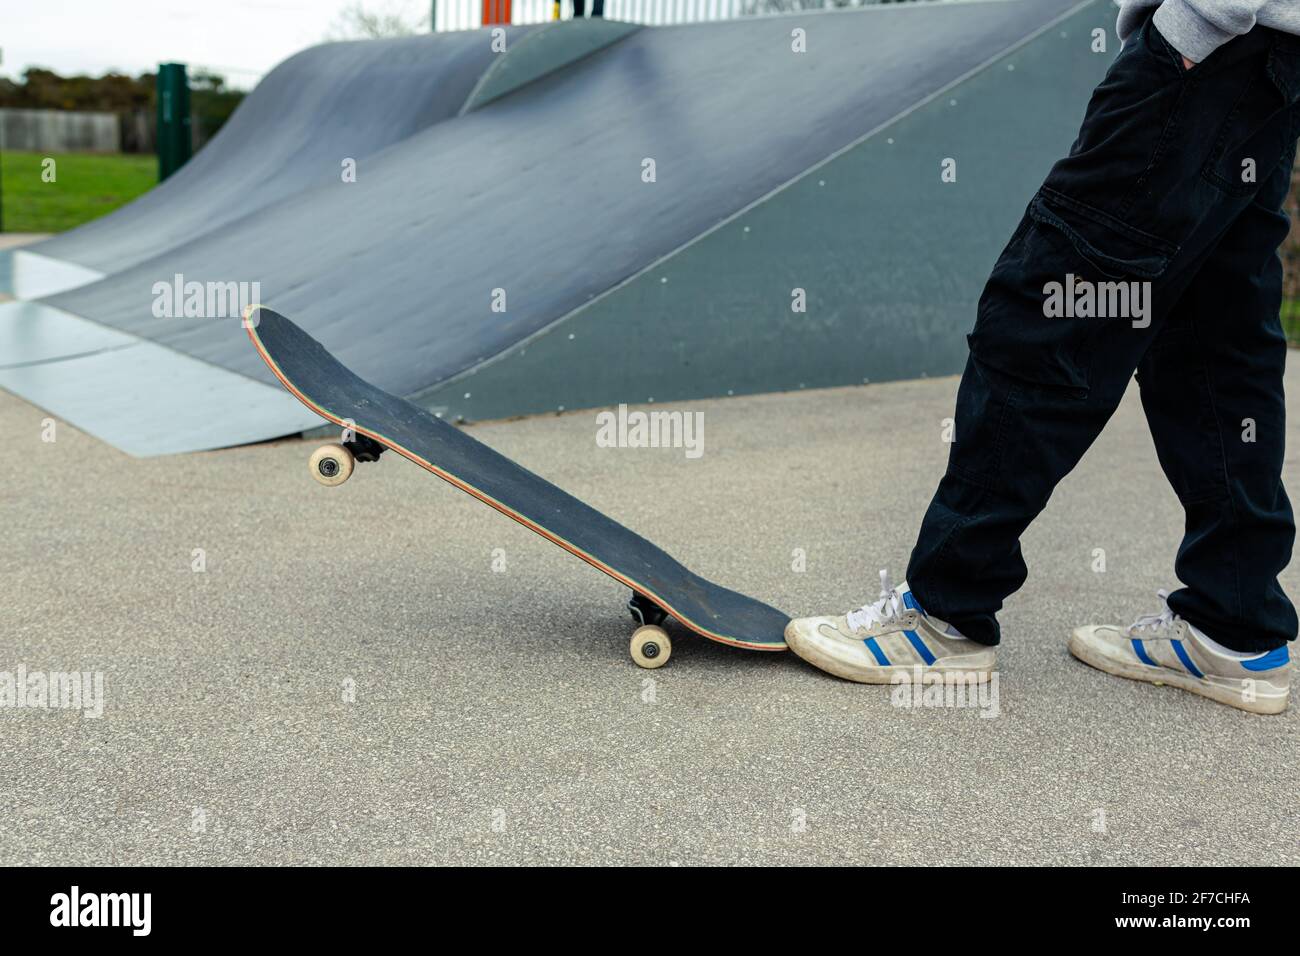 Close up of a skateboard with an unknown person standing behind it. Skateboarding healthy lifestyle concept Stock Photo